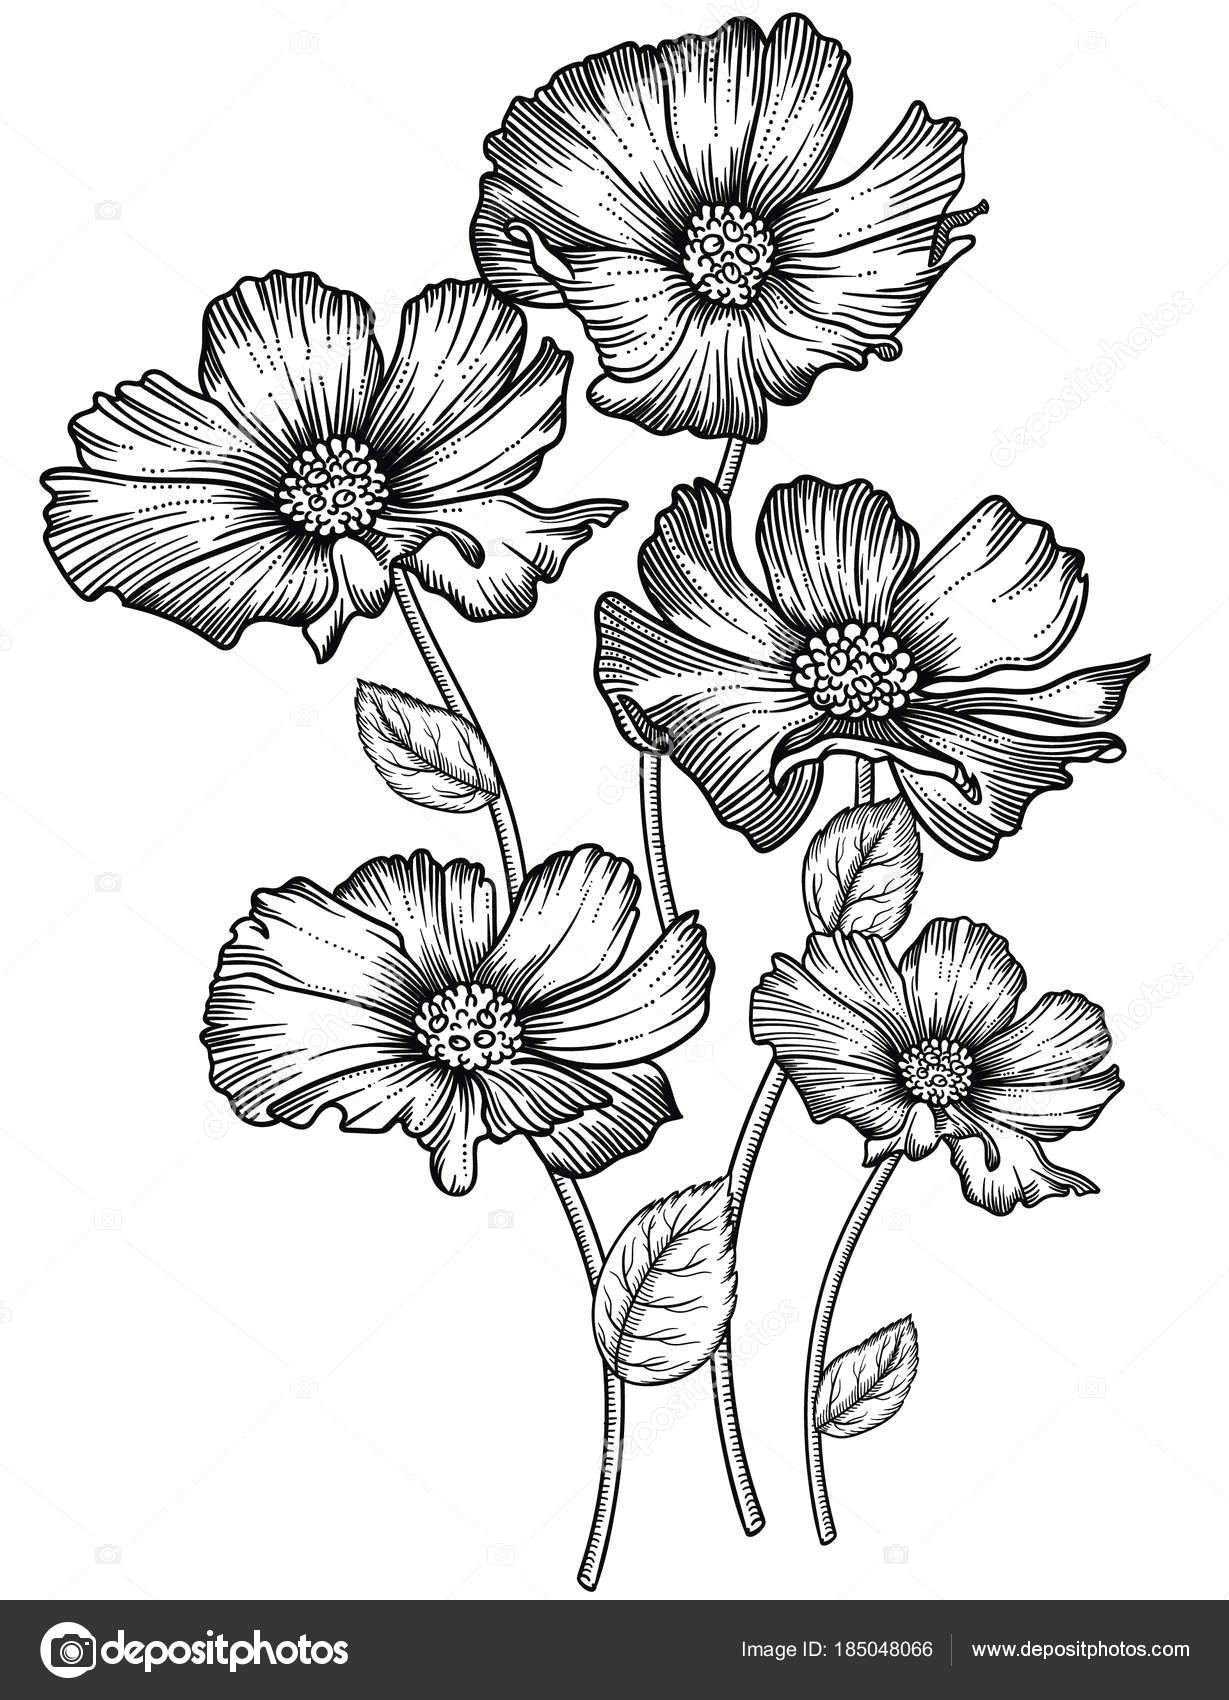 Drawings Of Detailed Flowers Blooming forest Flowers Detailed Hand Drawn Vector Illustration